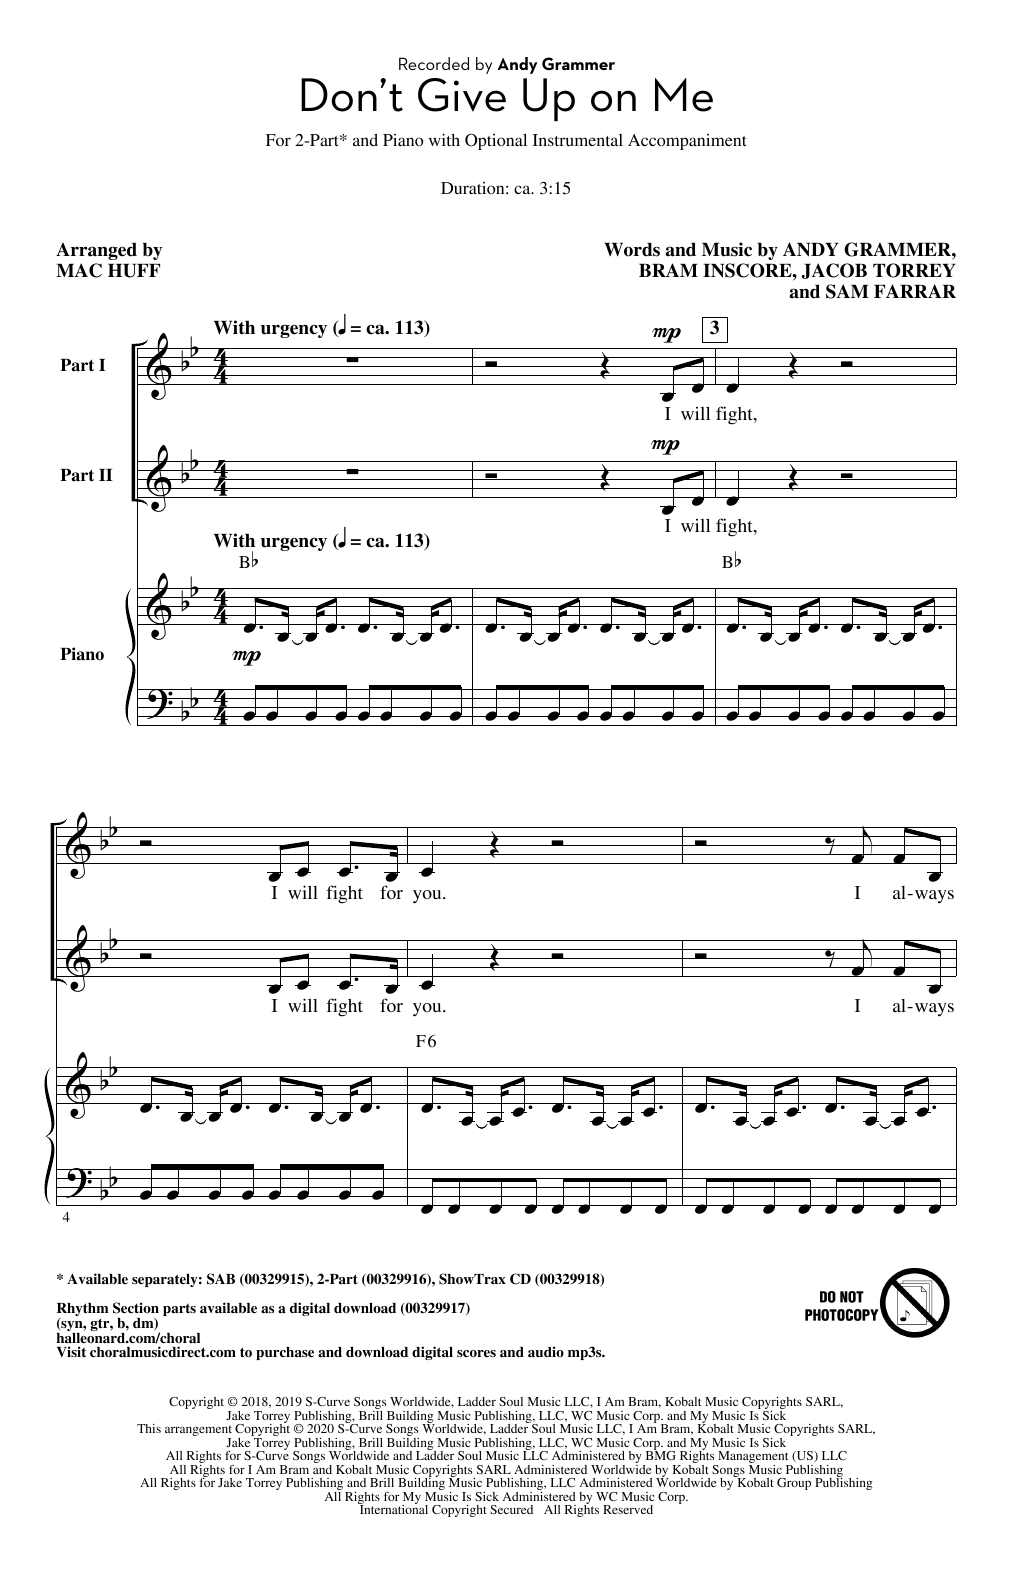 Download Andy Grammer Don't Give Up On Me (arr. Mac Huff) Sheet Music